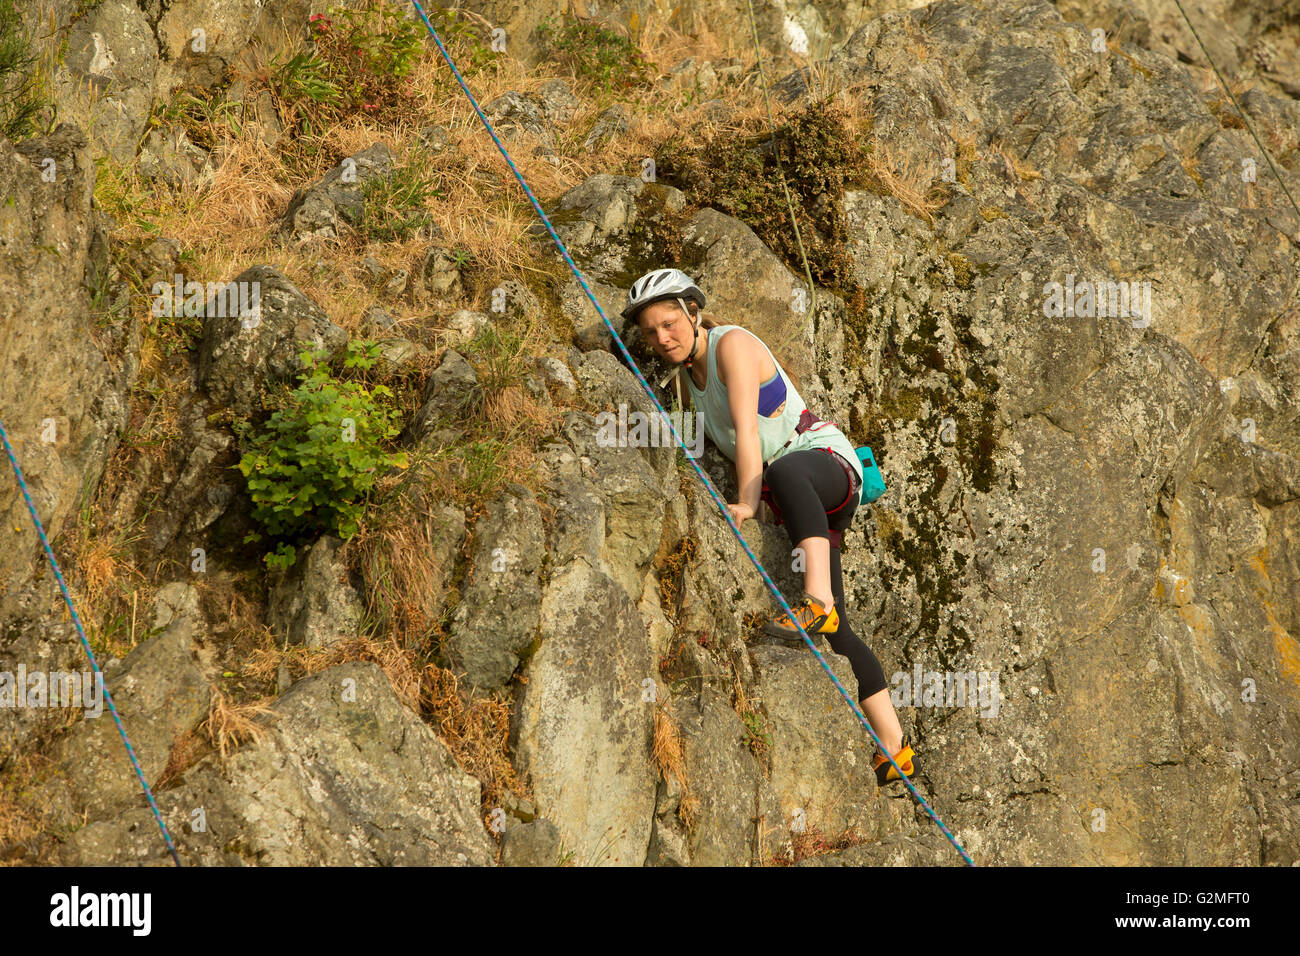 Female rock climber practicing on rocky cliff face at MaCauley Point park-Victoria, British Columbia, Canada. Stock Photo